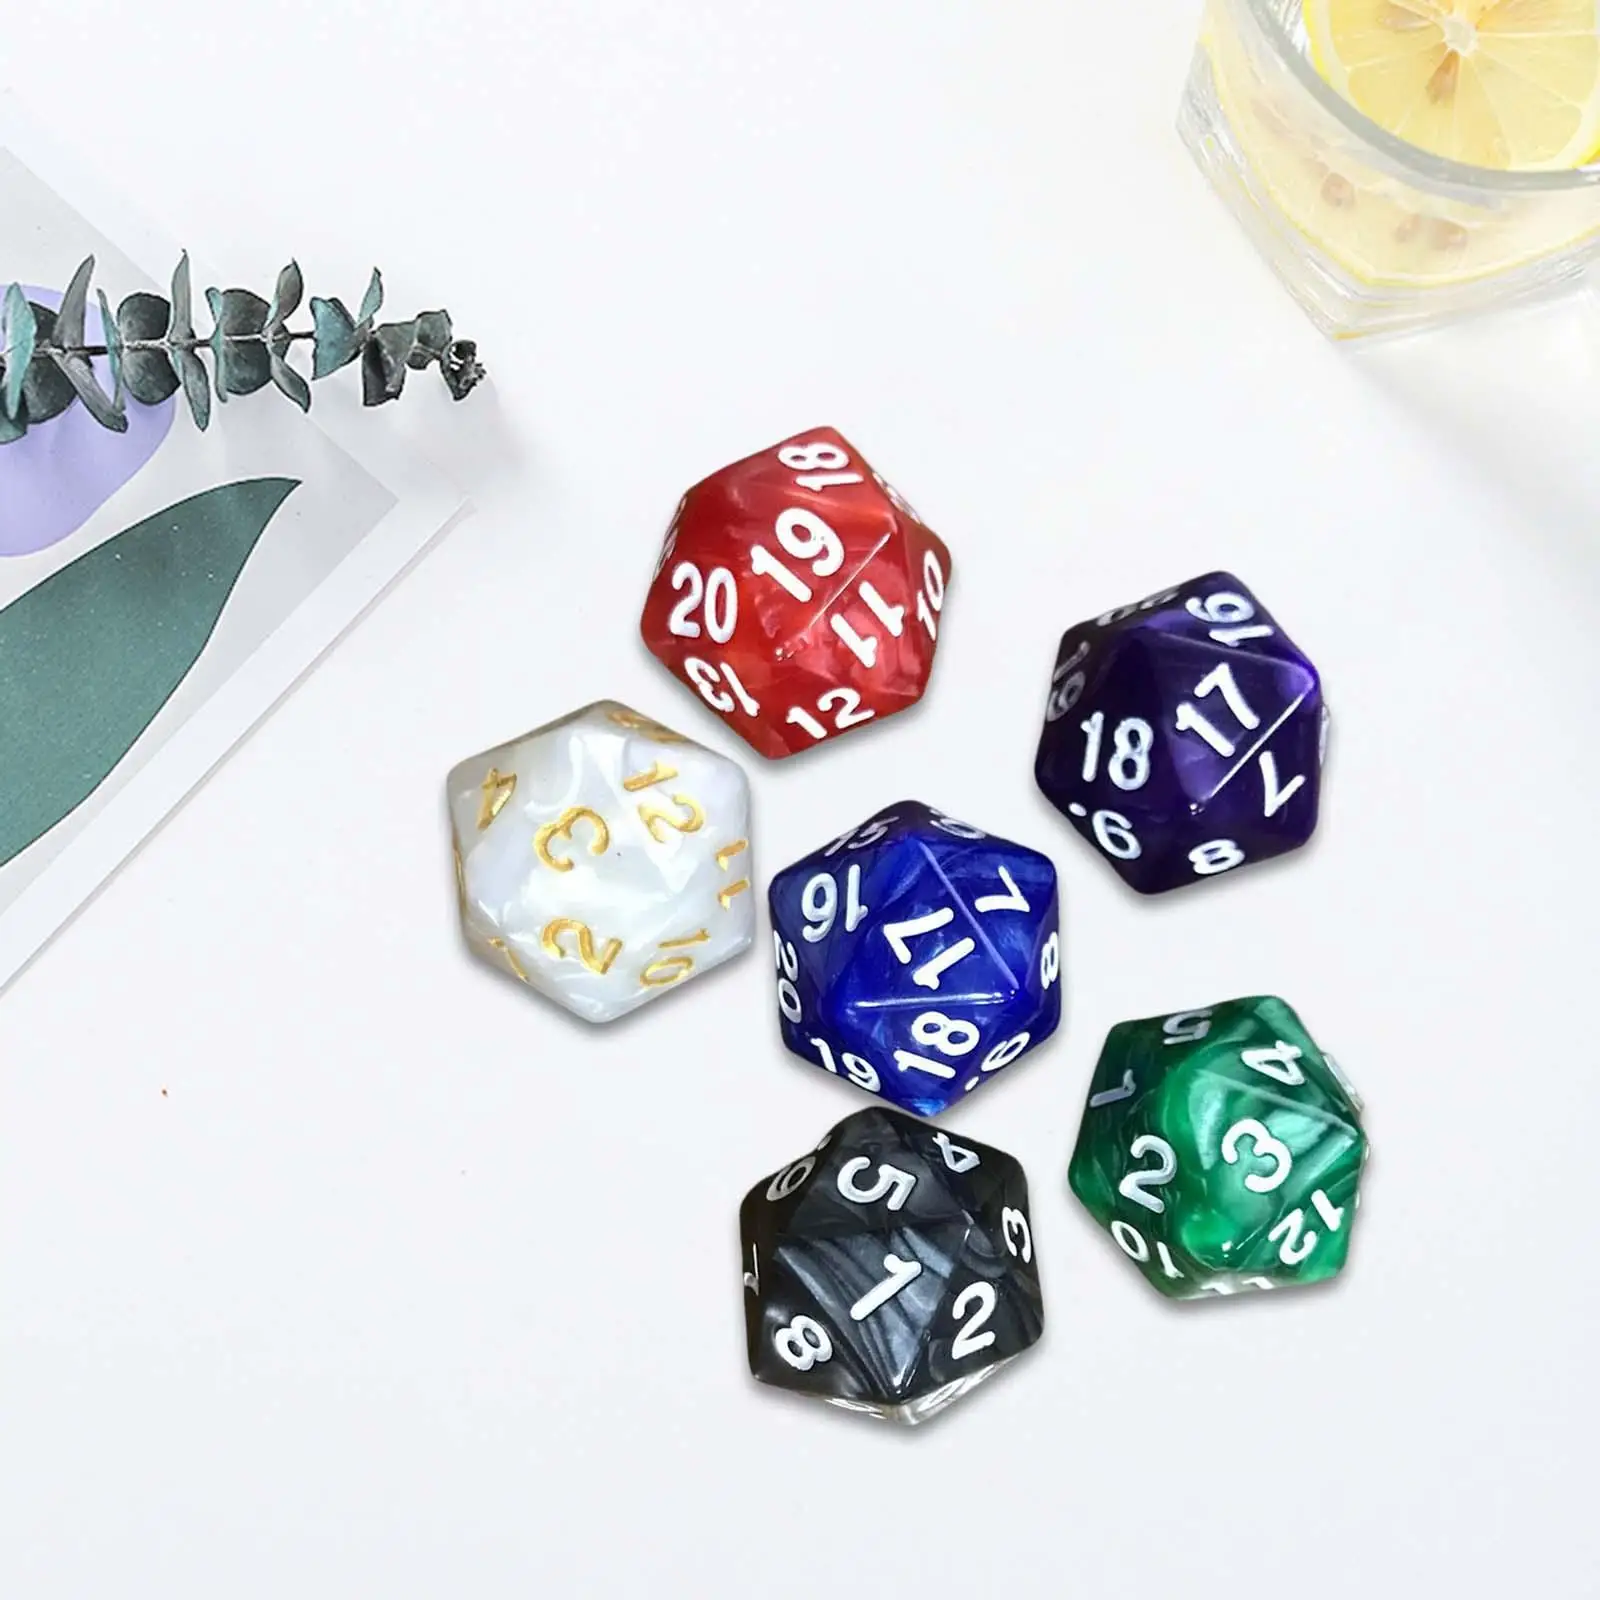 6x D20 Dices Acrylic 20mm Dices Entertainment Toys Party Supplies 20 Sided Dices Set D20 Polyhedral Dices for Party Table Game